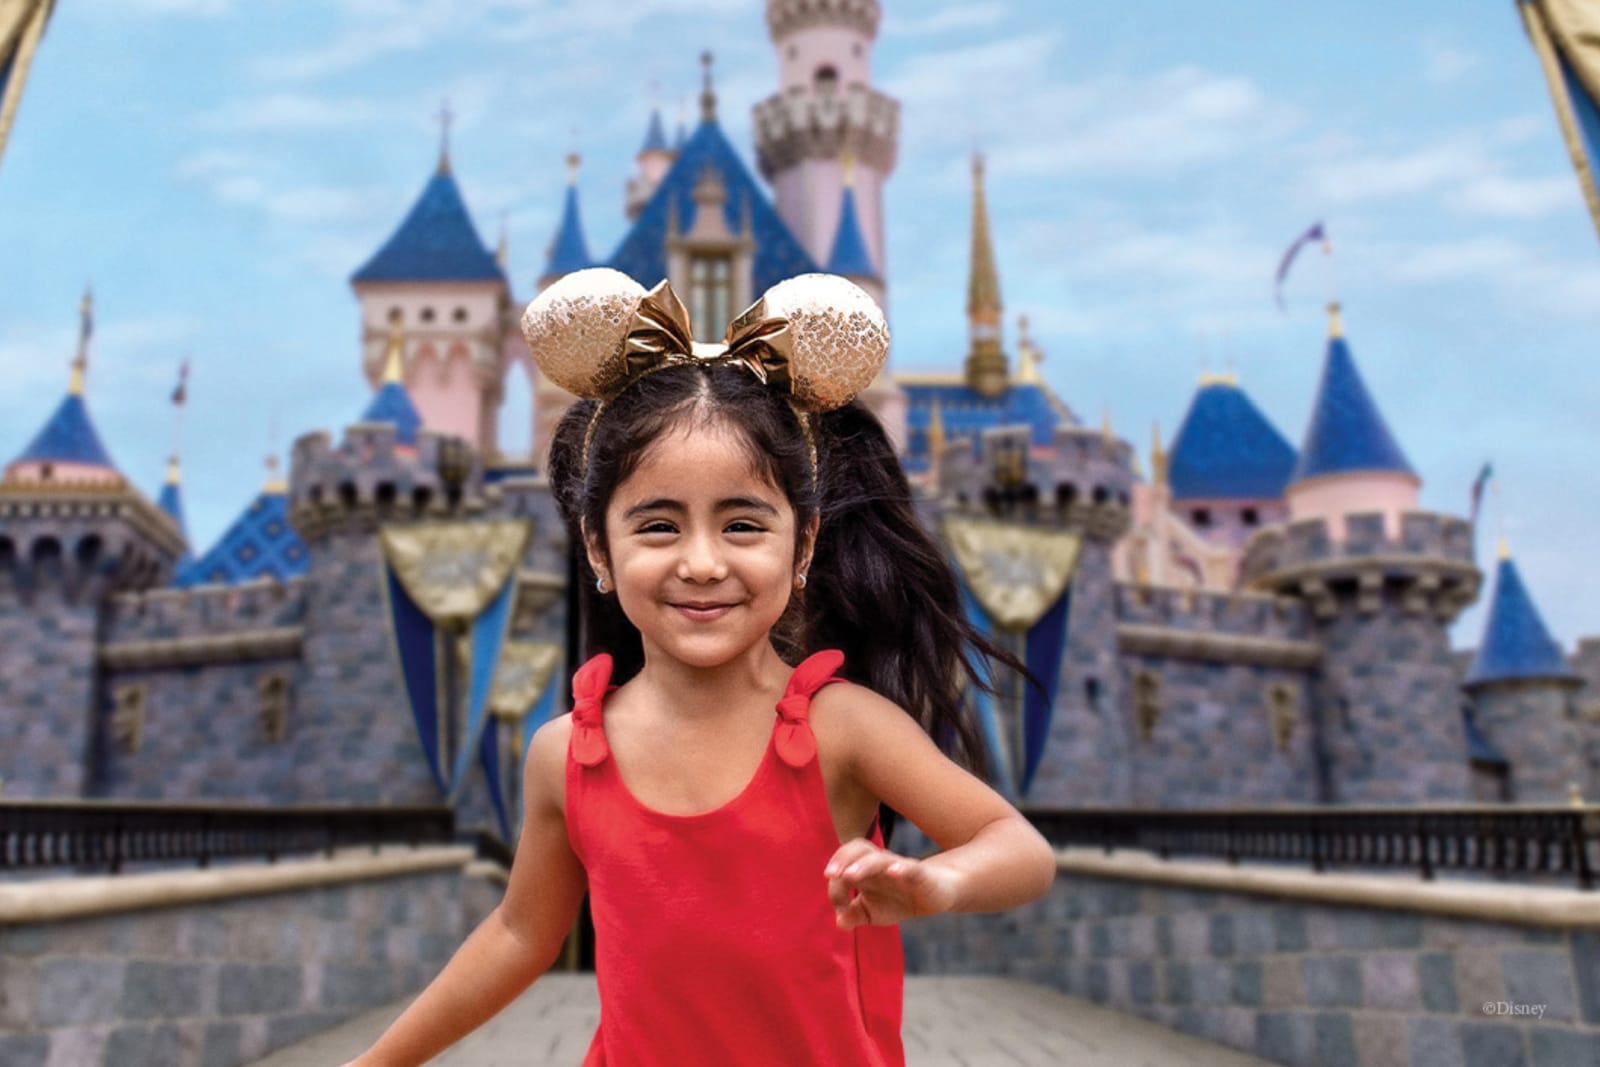 Young girl running in front of the castle at Disneyland